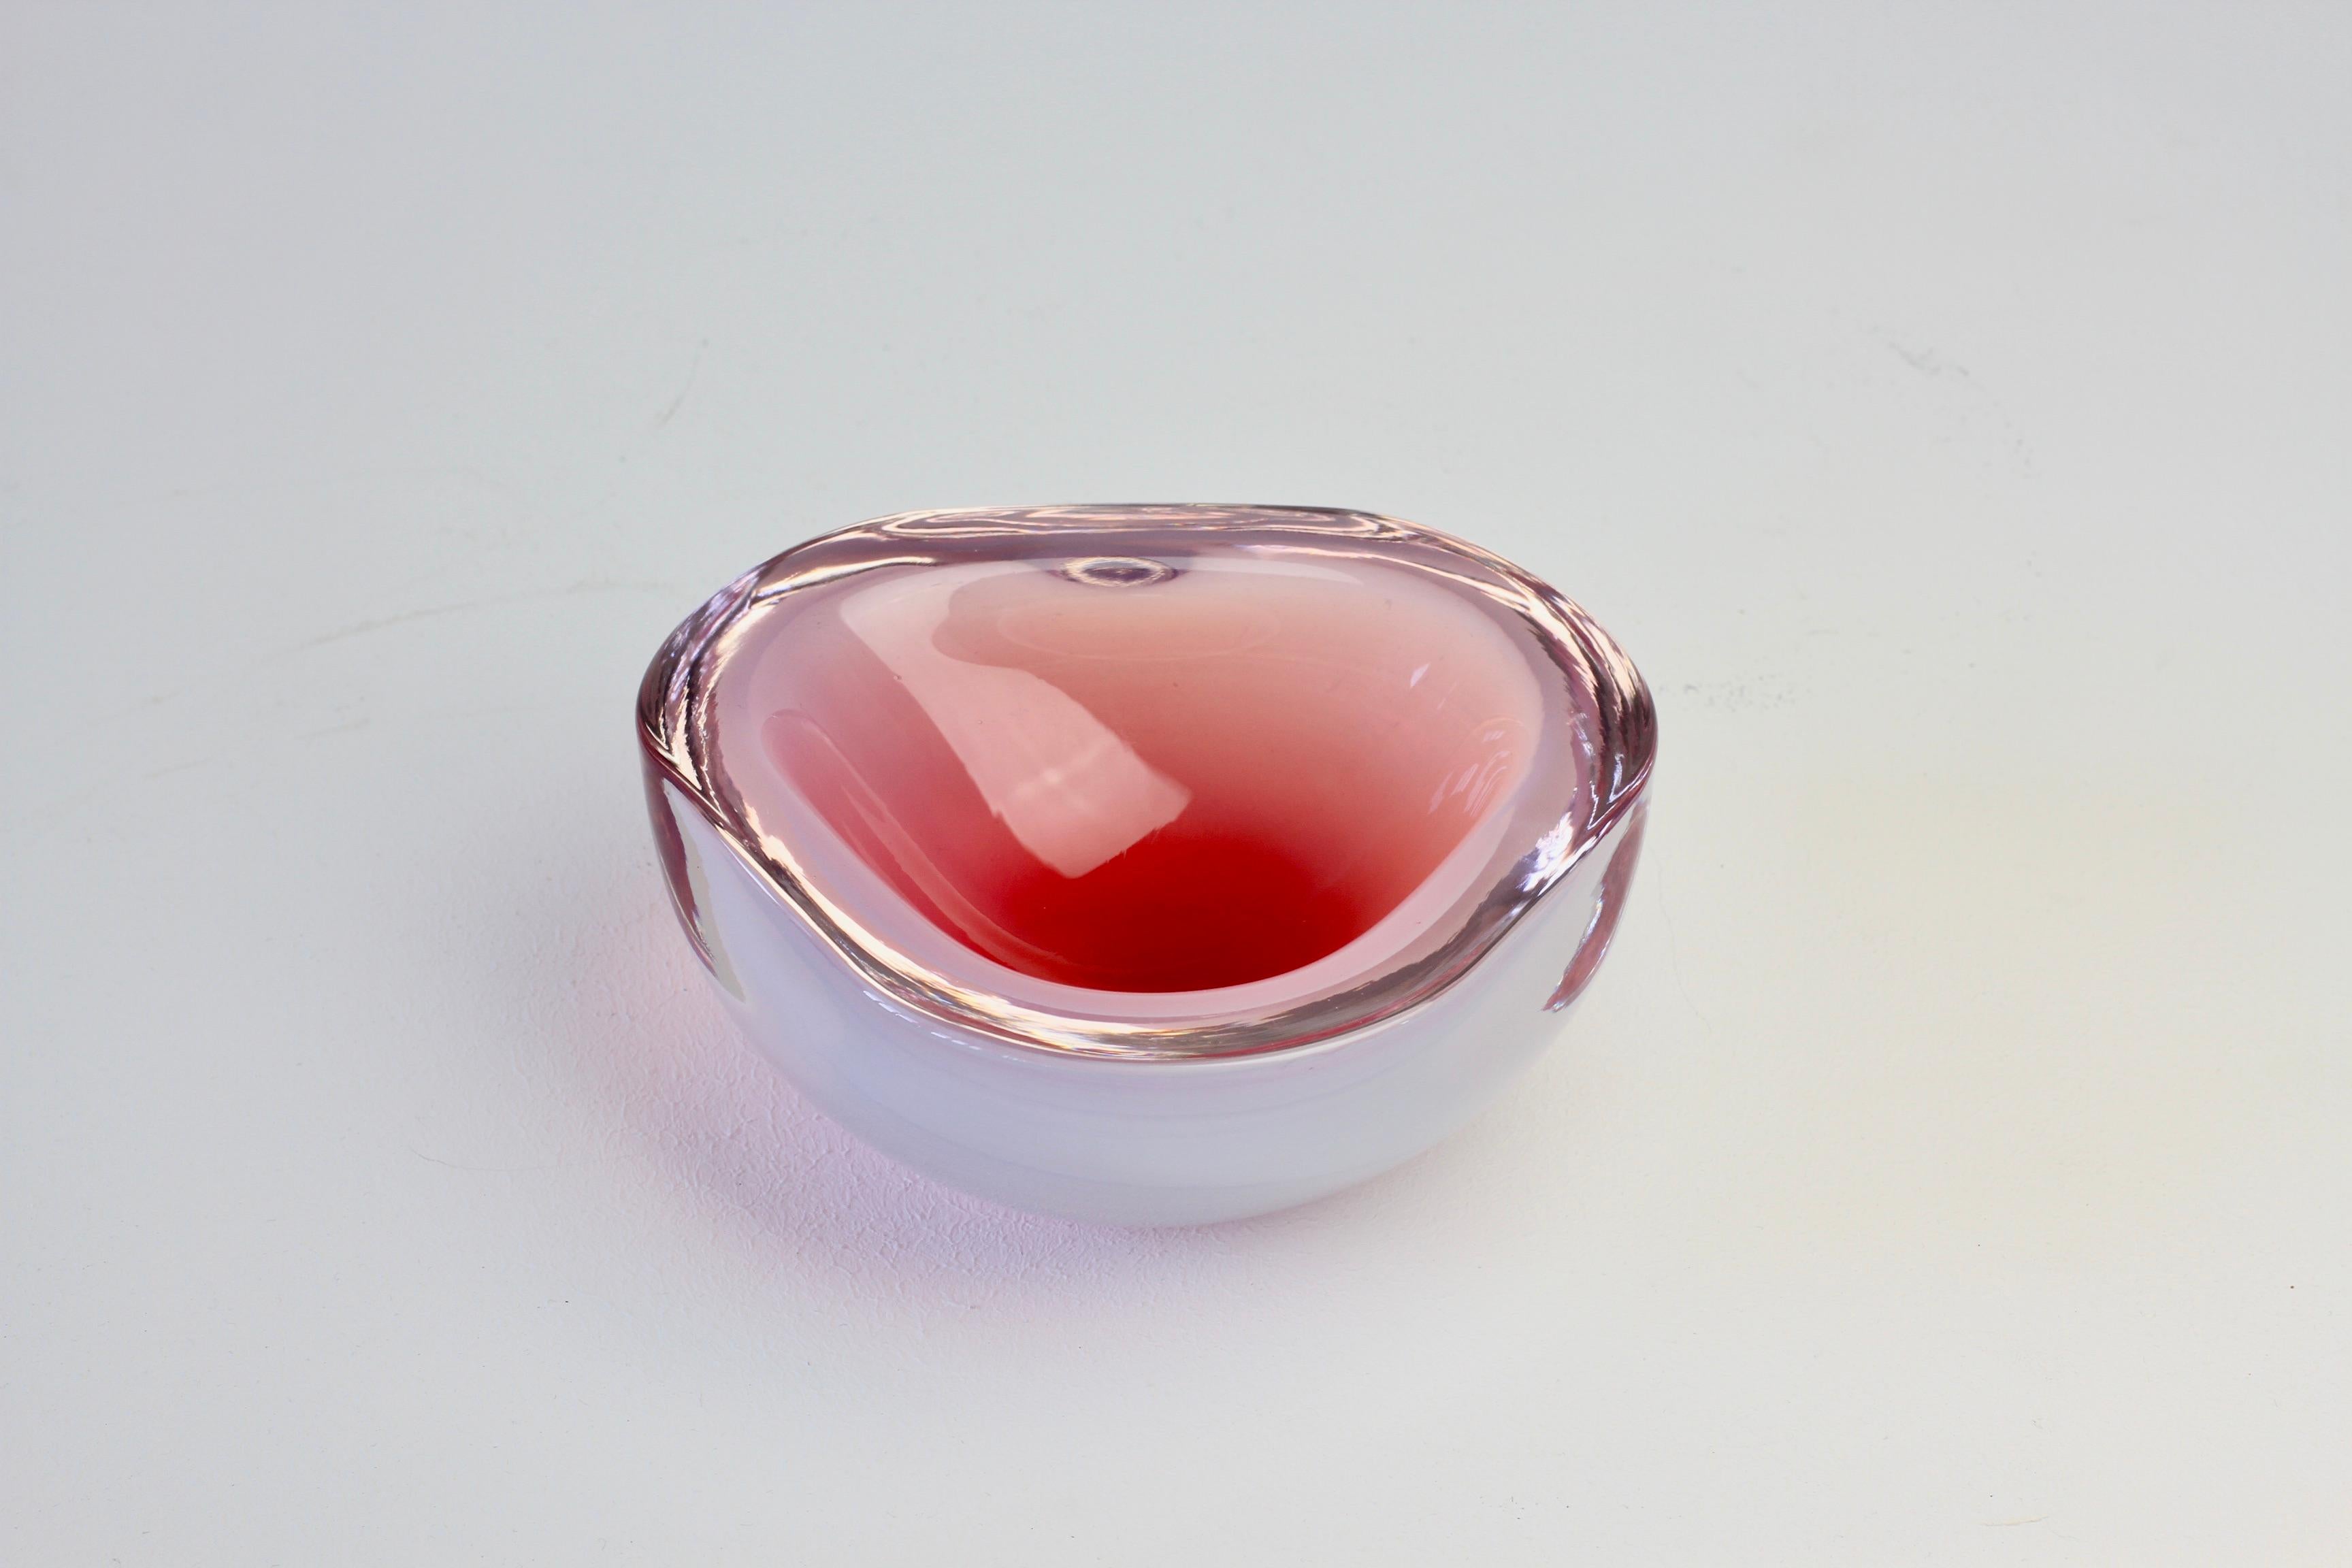 Blown Glass Cenedese Italian Pink Opaline Sommerso Murano Glass Bowl, Dish, Ashtray 1960s